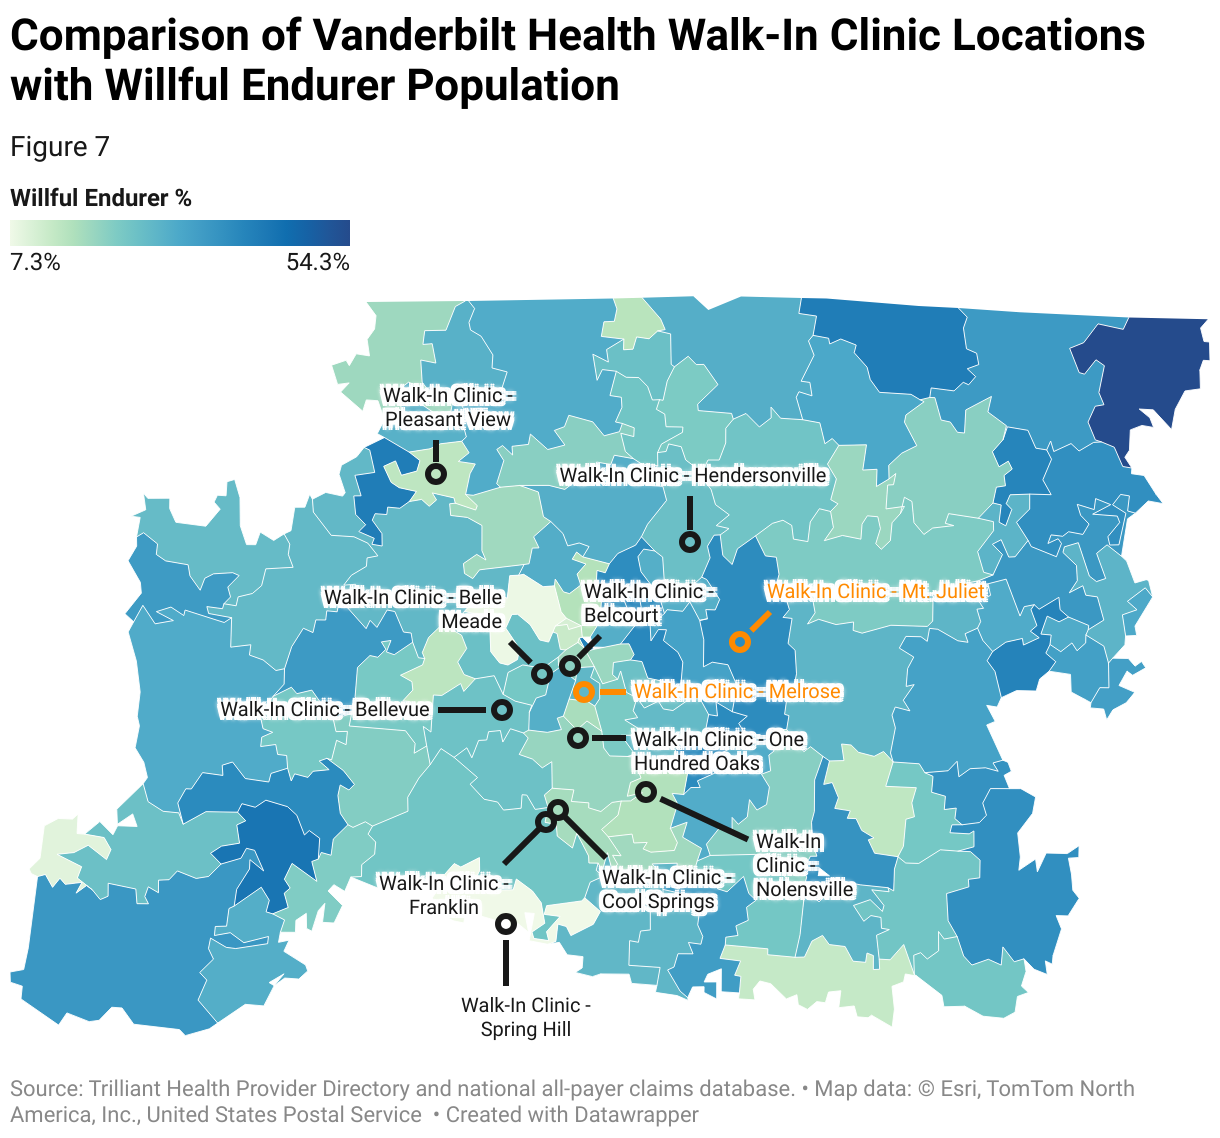 Map of Vanderbilt Health Walk-In Locations shows that only two walk-in clinics are located in ZIP Codes with a higher-than-average Willful Endurer population.